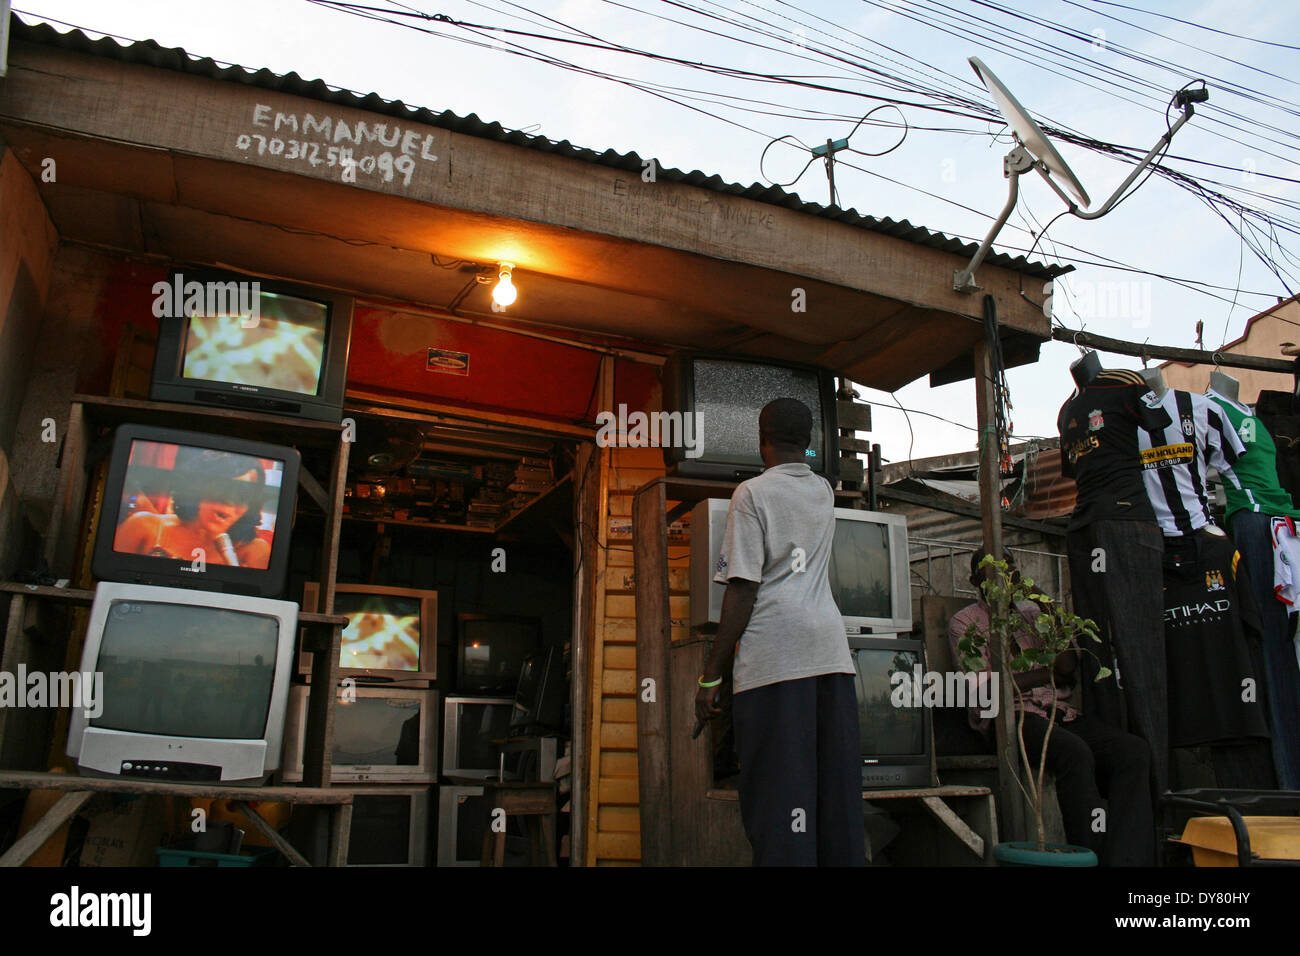 Television sets on display outside a local shop in Lagos, Nigeria on October 9, 2010. With advances in modern technology, more l Stock Photo